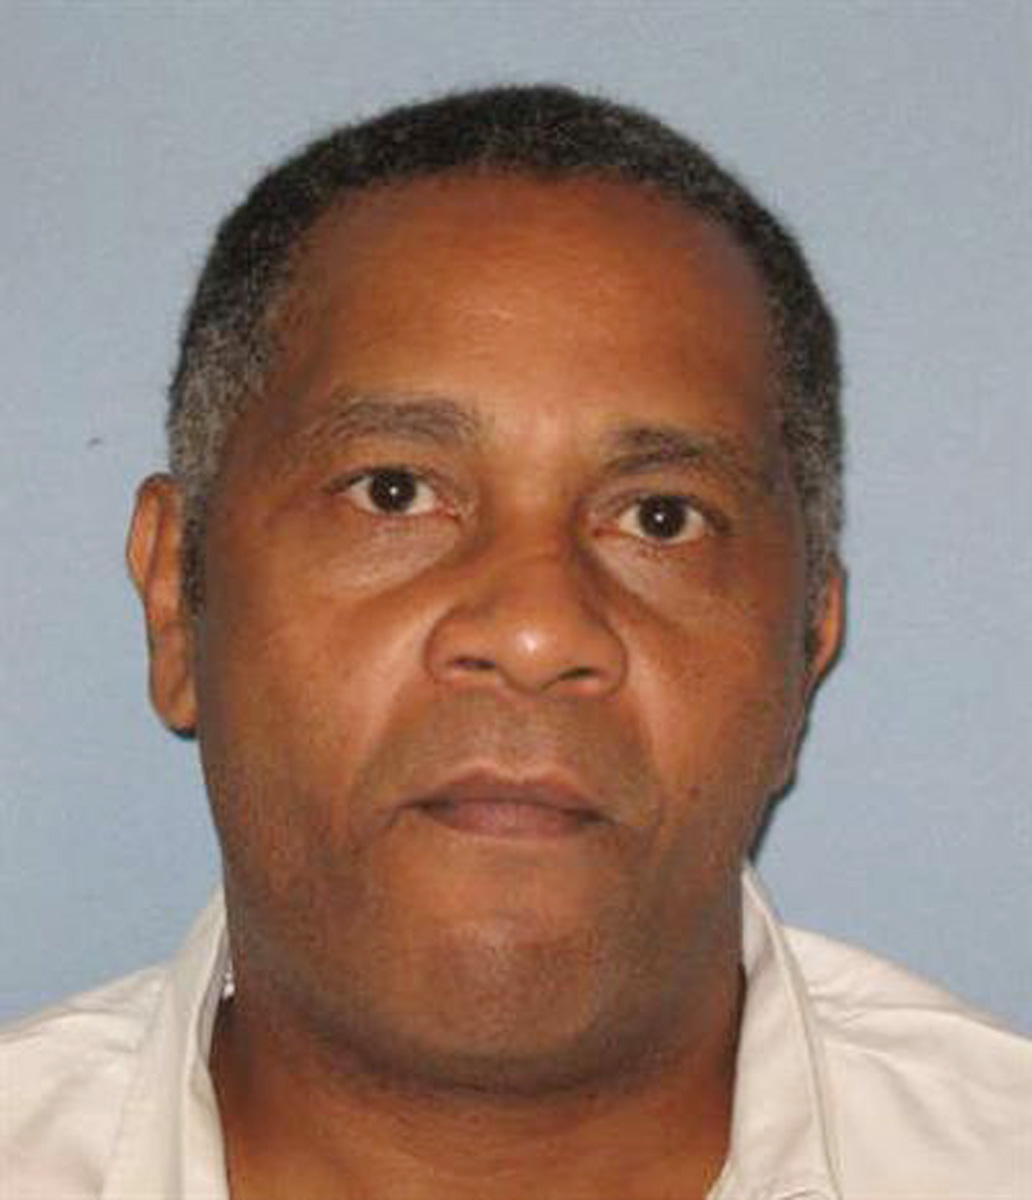 Alabama death row inmate to be freed after nearly 30 years